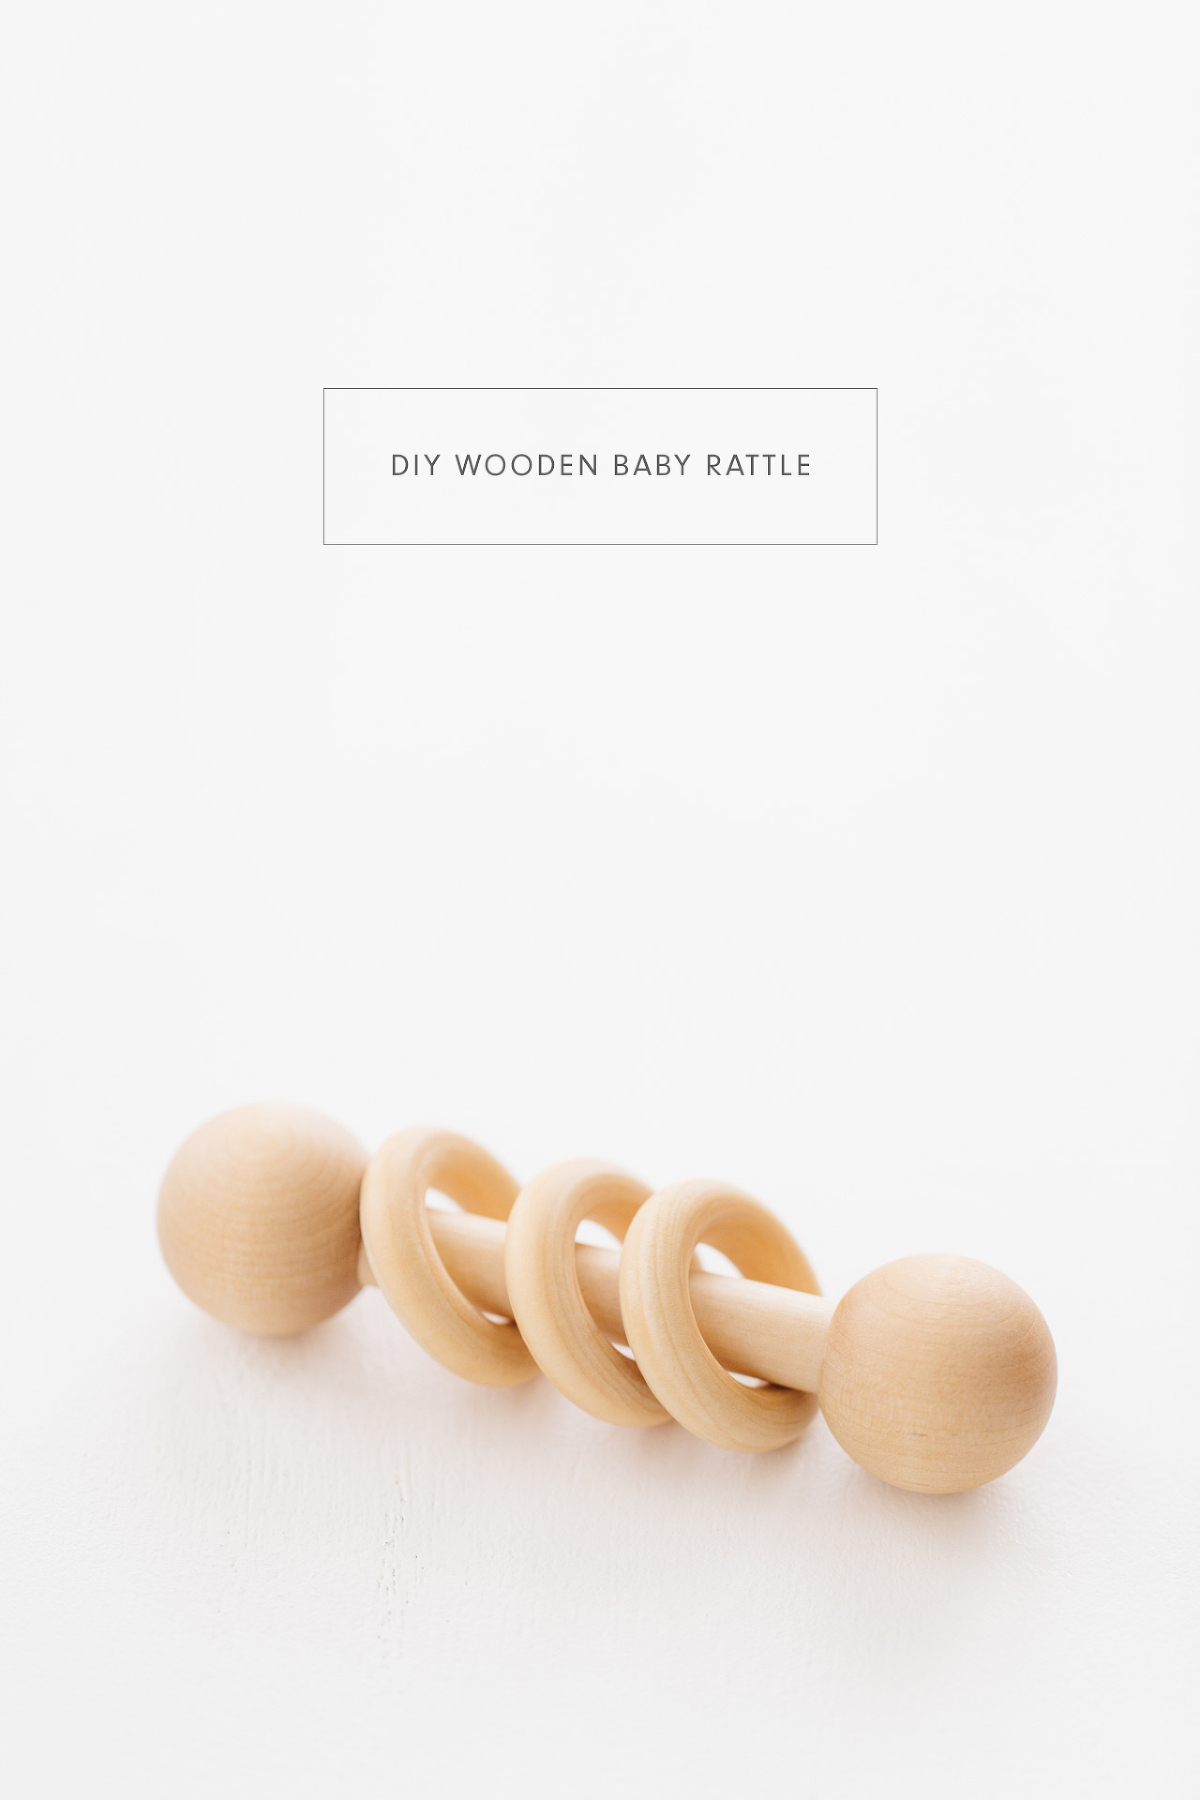 homemade wooden baby toys